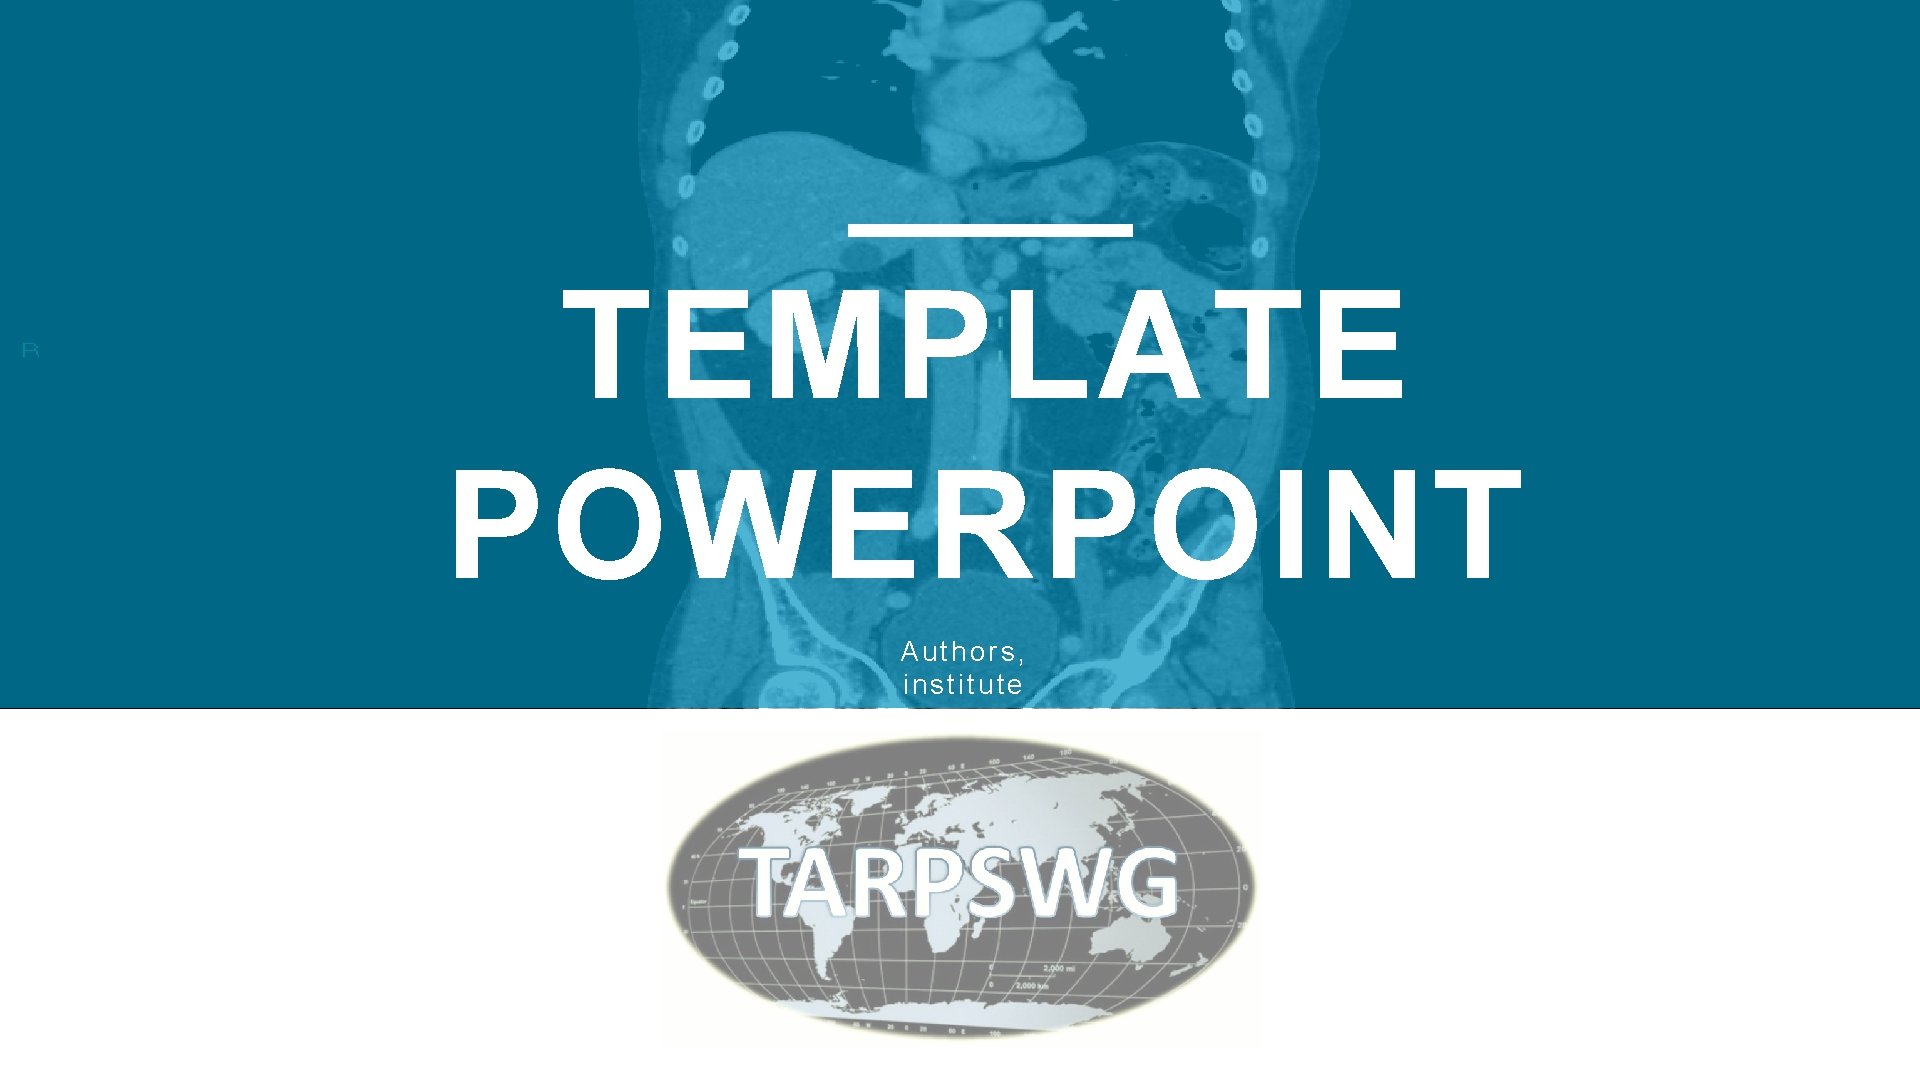 3 TEMPLATE POWERPOINT Authors, institute 